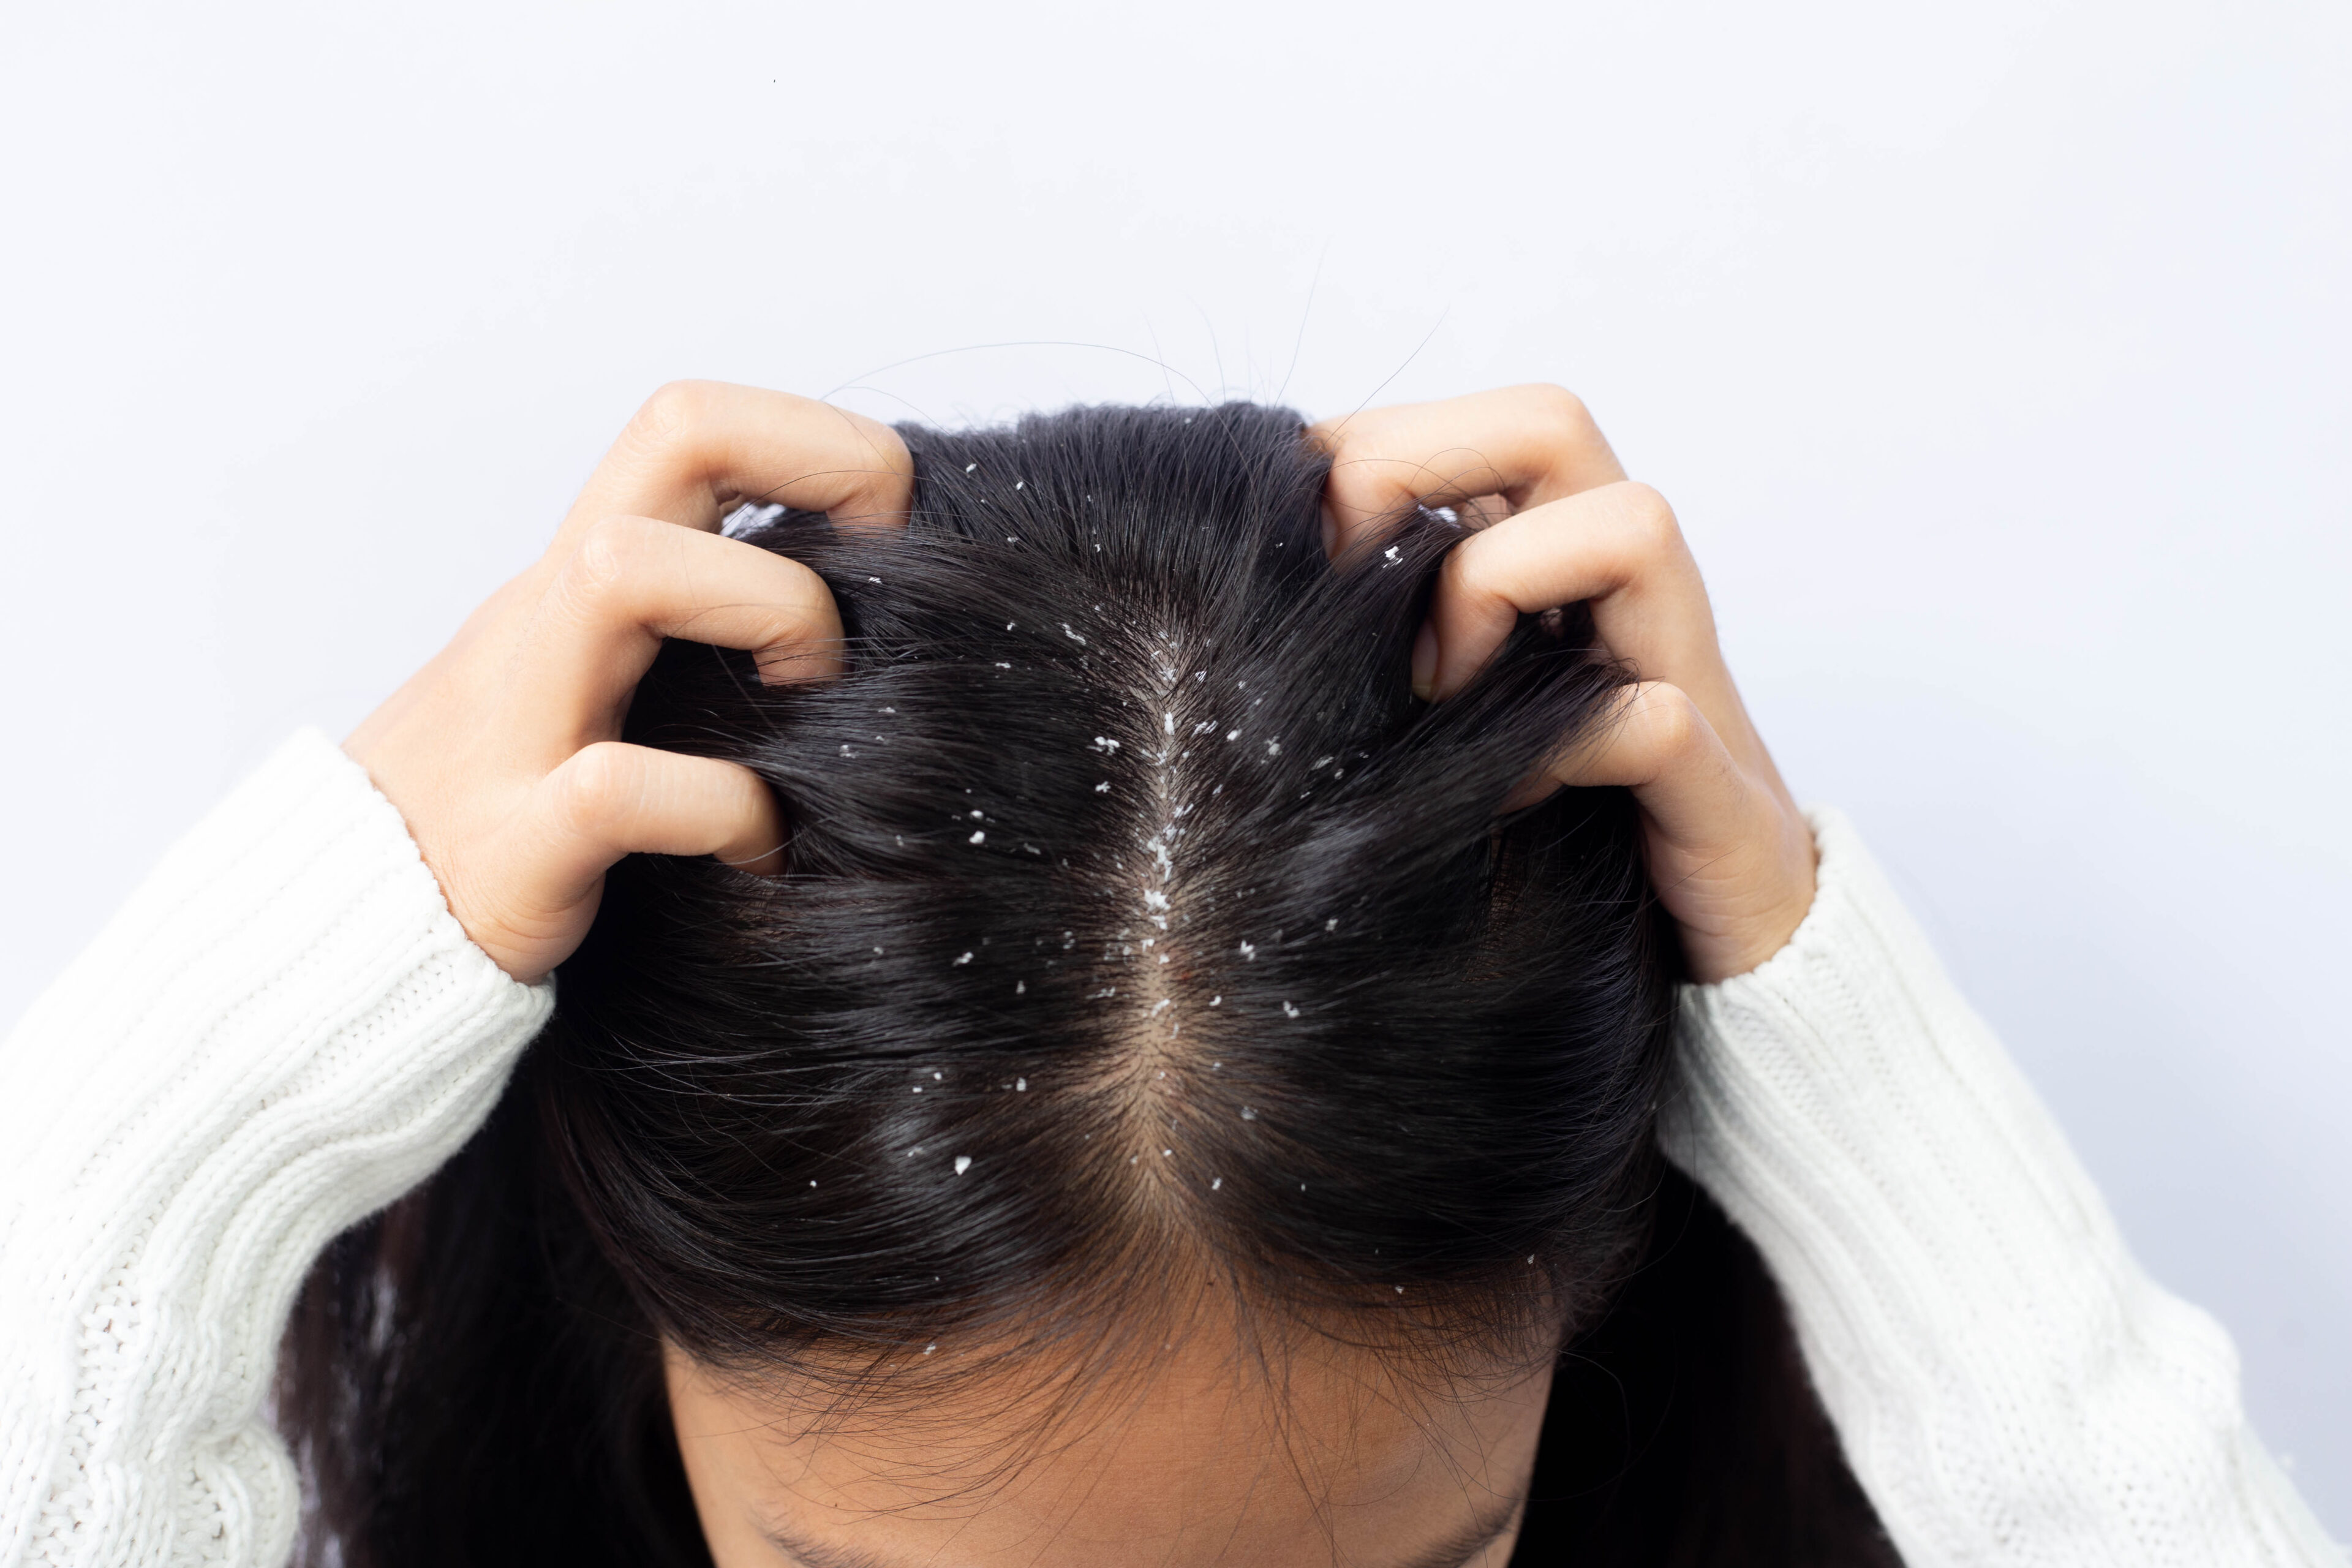 How to treat and heal scabs on scalp from bleach